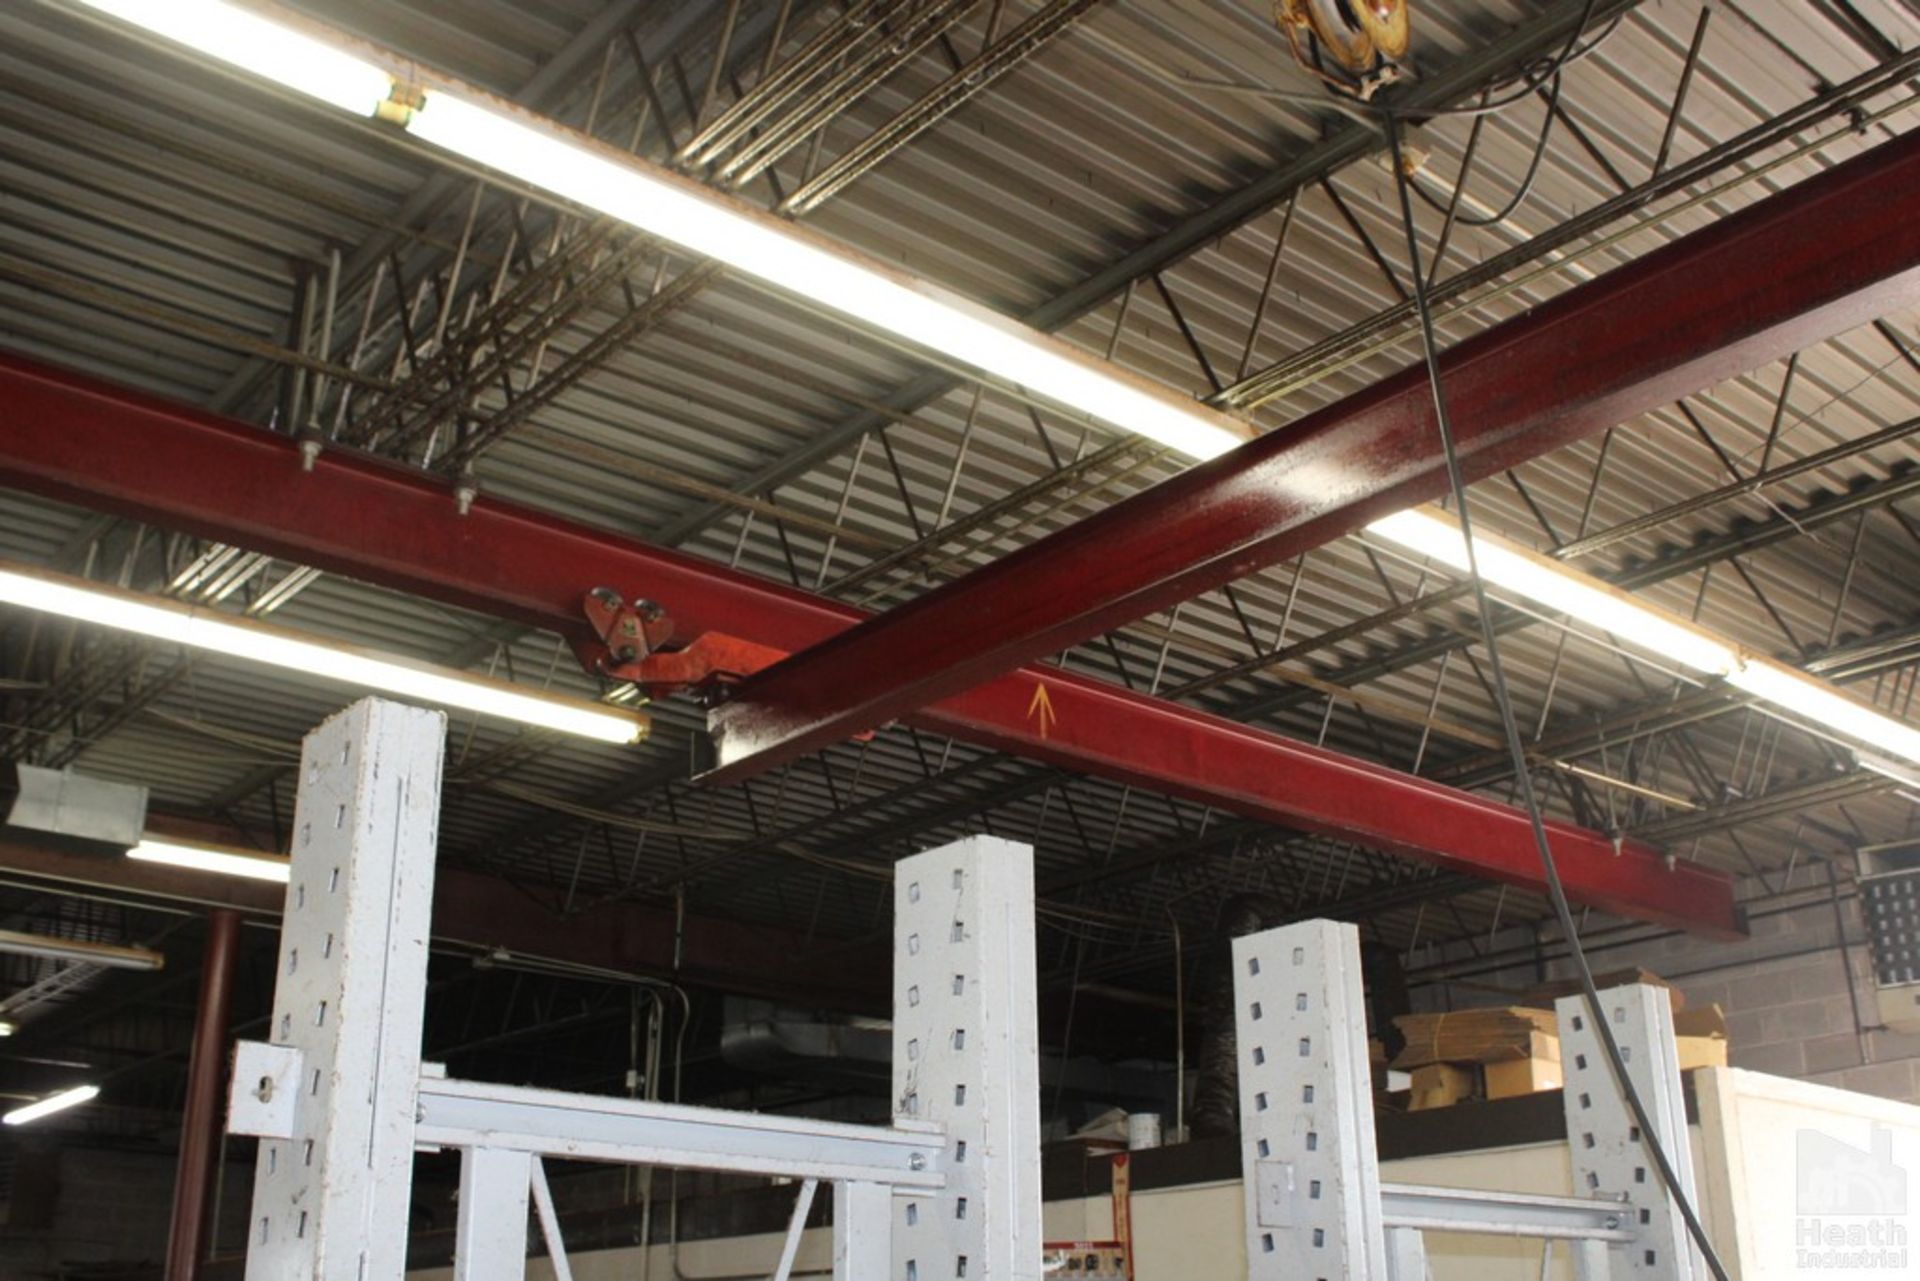 2 TON BRIDGE CRANE APPROXIMATELY 29' L X 19' 6" W INCLUDES TWO IBEAM TRACKS APPROXIMATELY 29' LONG - Image 4 of 6